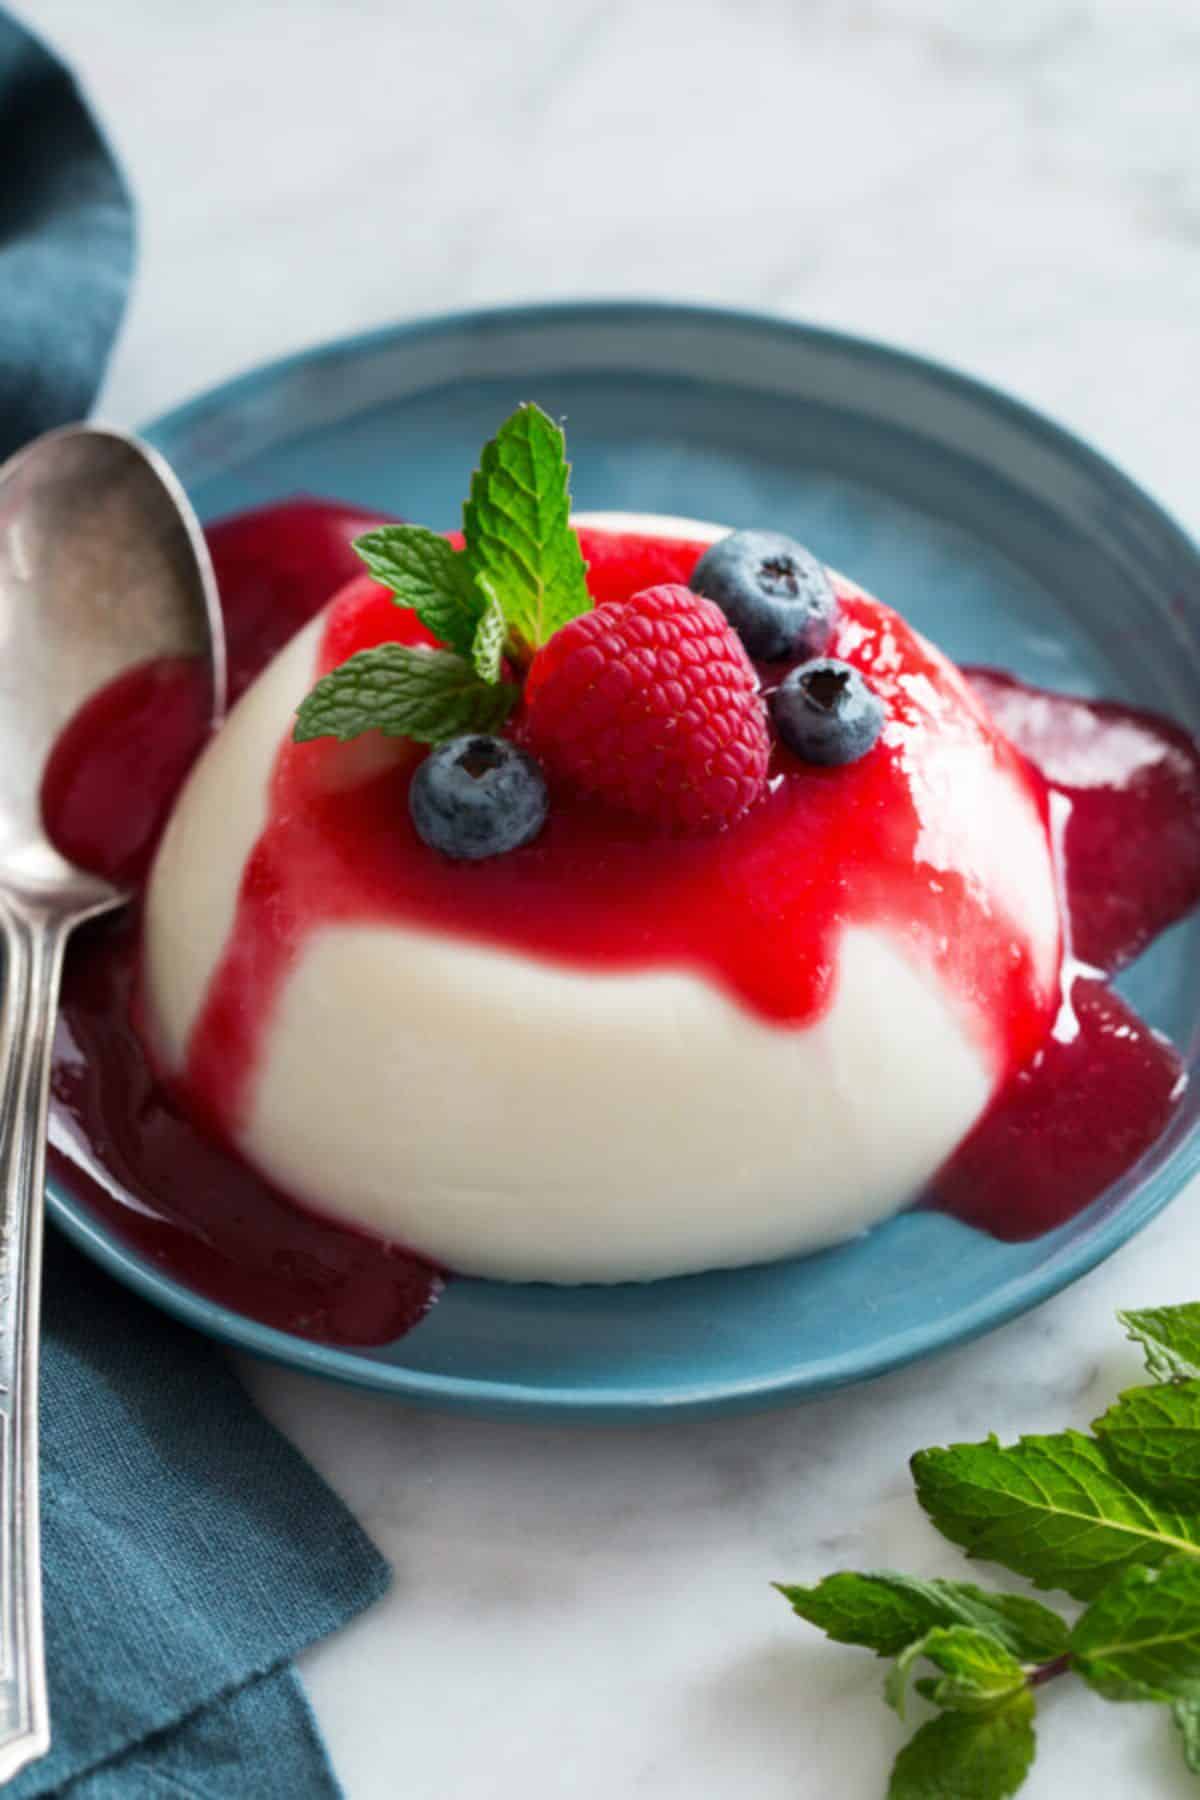 Panna Cotta italian dessert with a strawberry and blueberries on the top on a blue plate with a spoon.